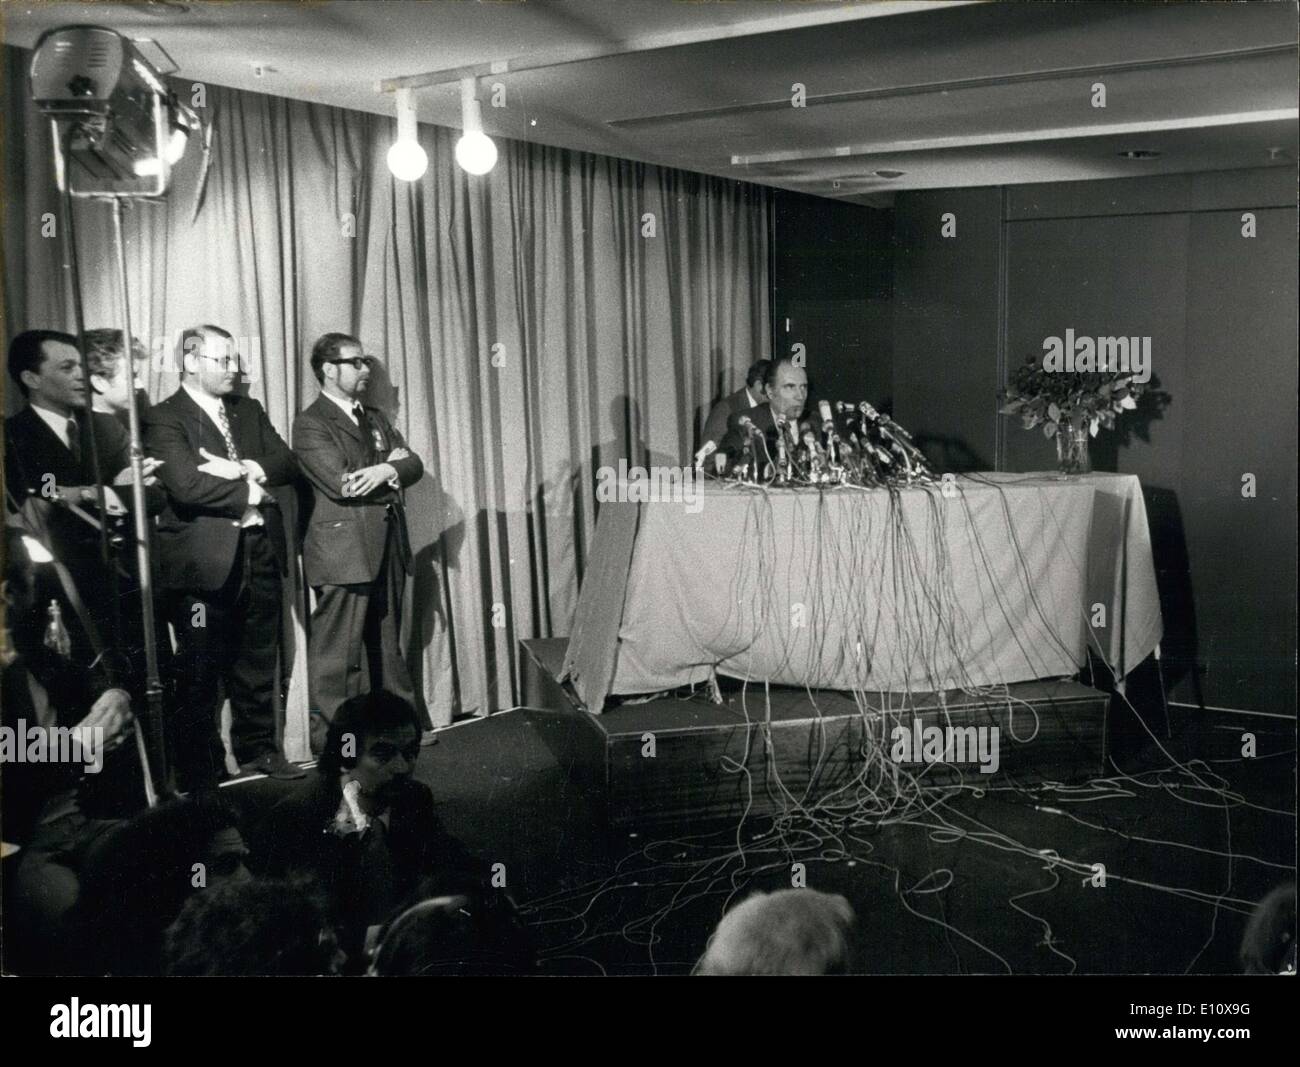 May 06, 1974 - Left Presidential Candidate Mitterrand held the press conference to comment on the first round of the elections in which he received 43% of the vote. He will be facing Giscard d'Estaing in the second round of the elections. Stock Photo